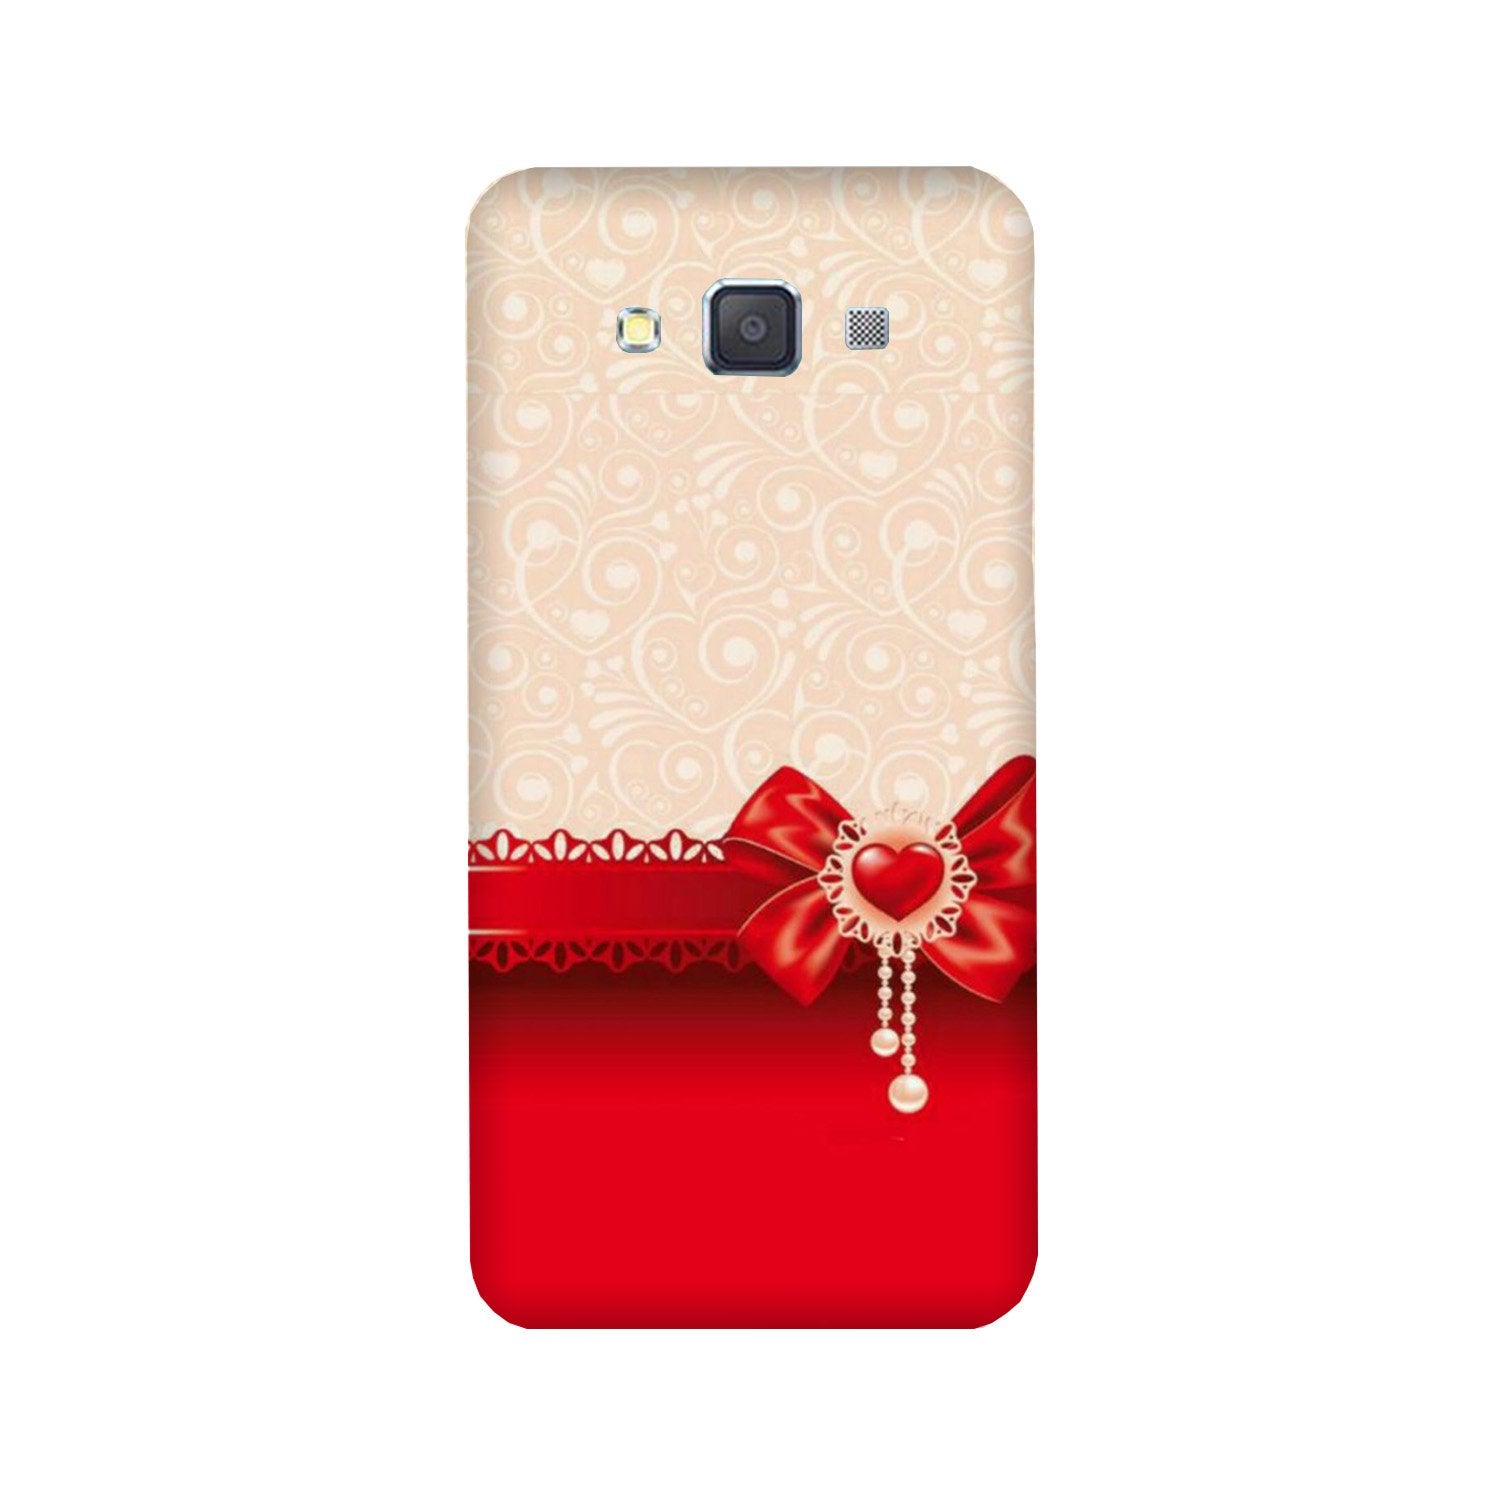 Gift Wrap3 Case for Galaxy A3 (2015)